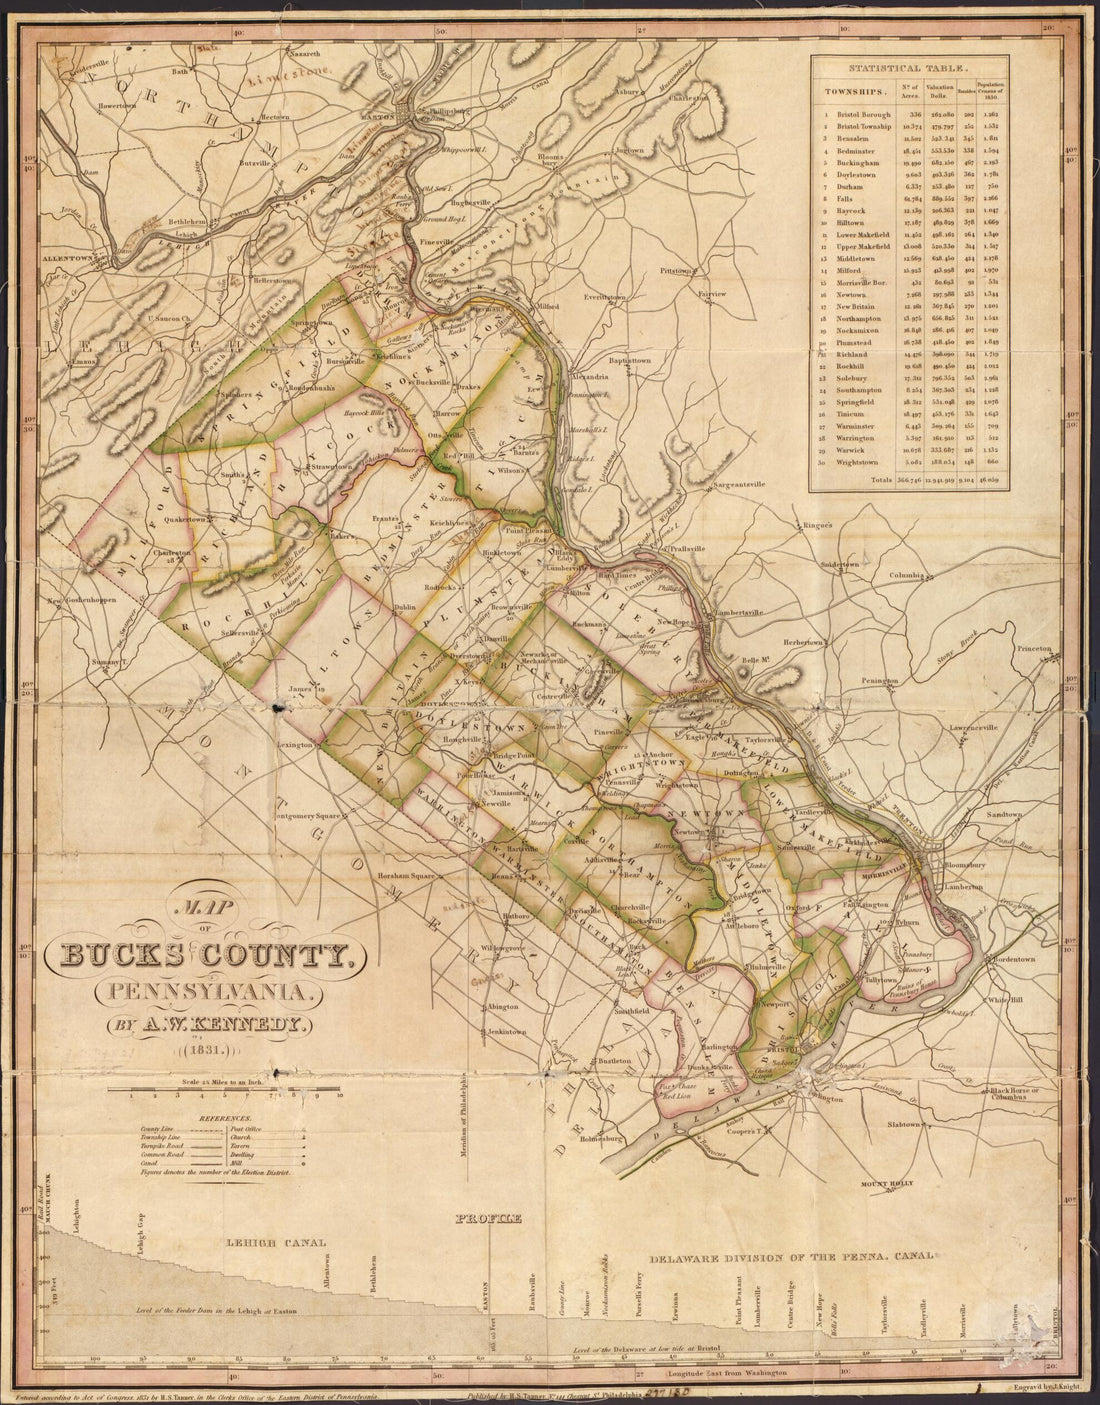 This old map of Map of Bucks County, Pennsylvania from 1831 was created by A. W. Kennedy, J. Knight, Henry Schenck Tanner in 1831